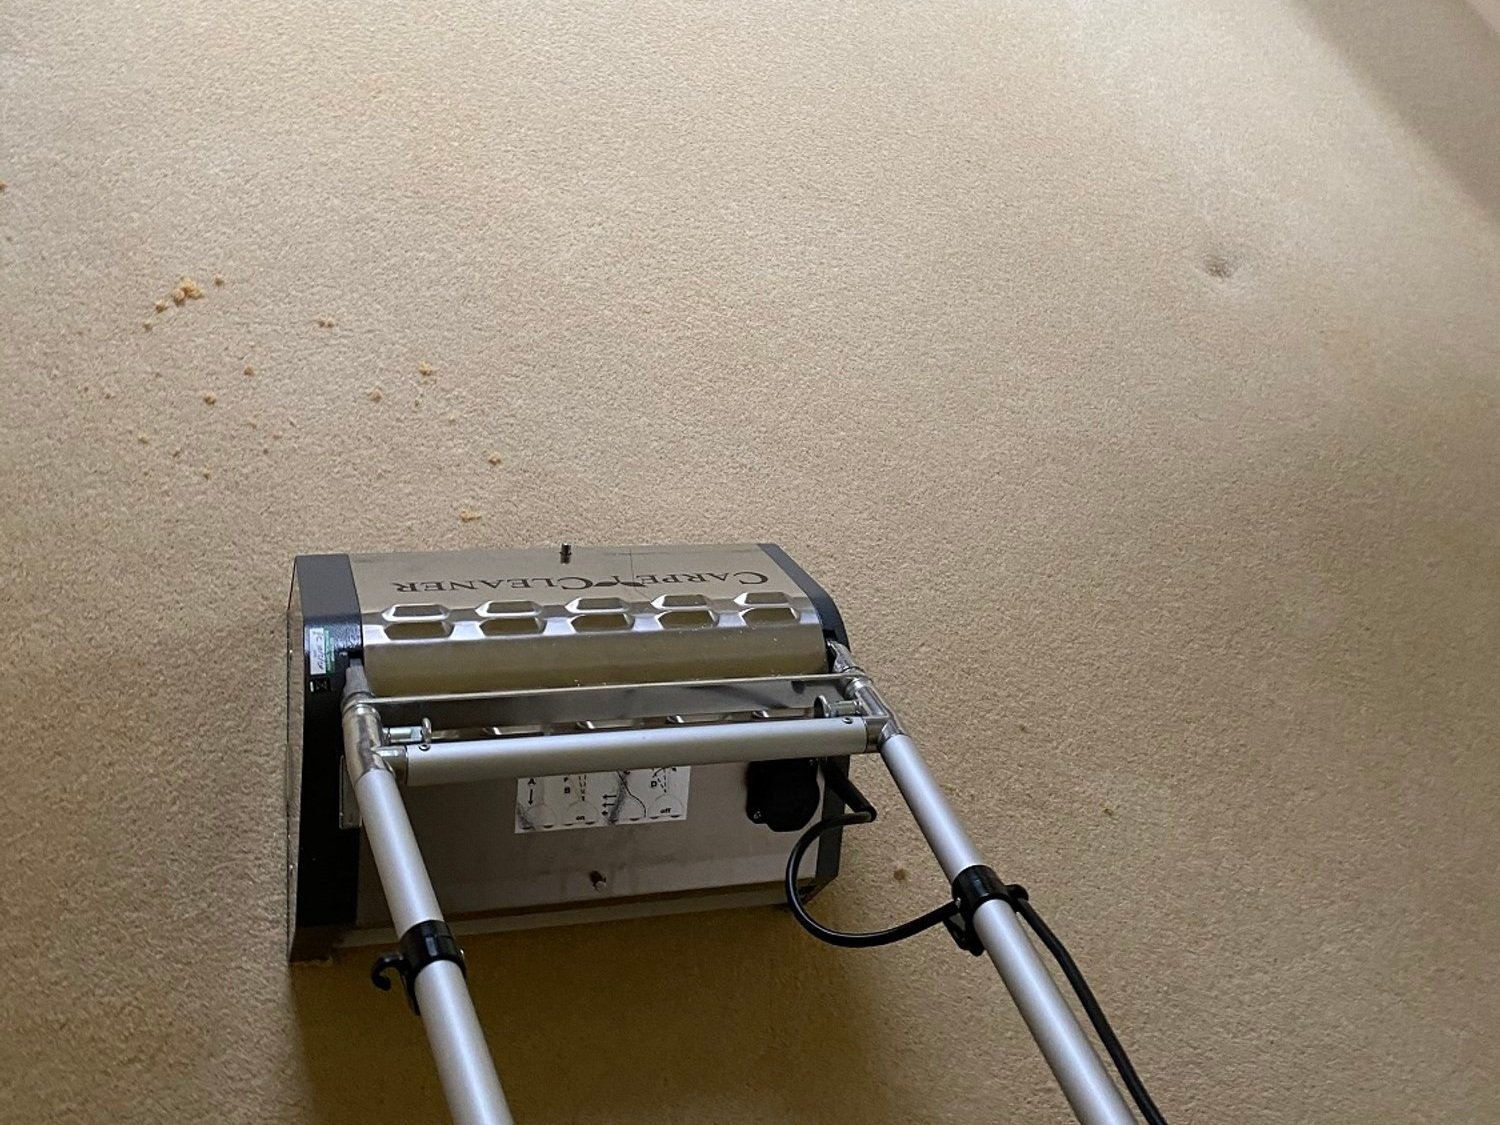 Dry carpet cleaning in Grimsby and Cleethorpes